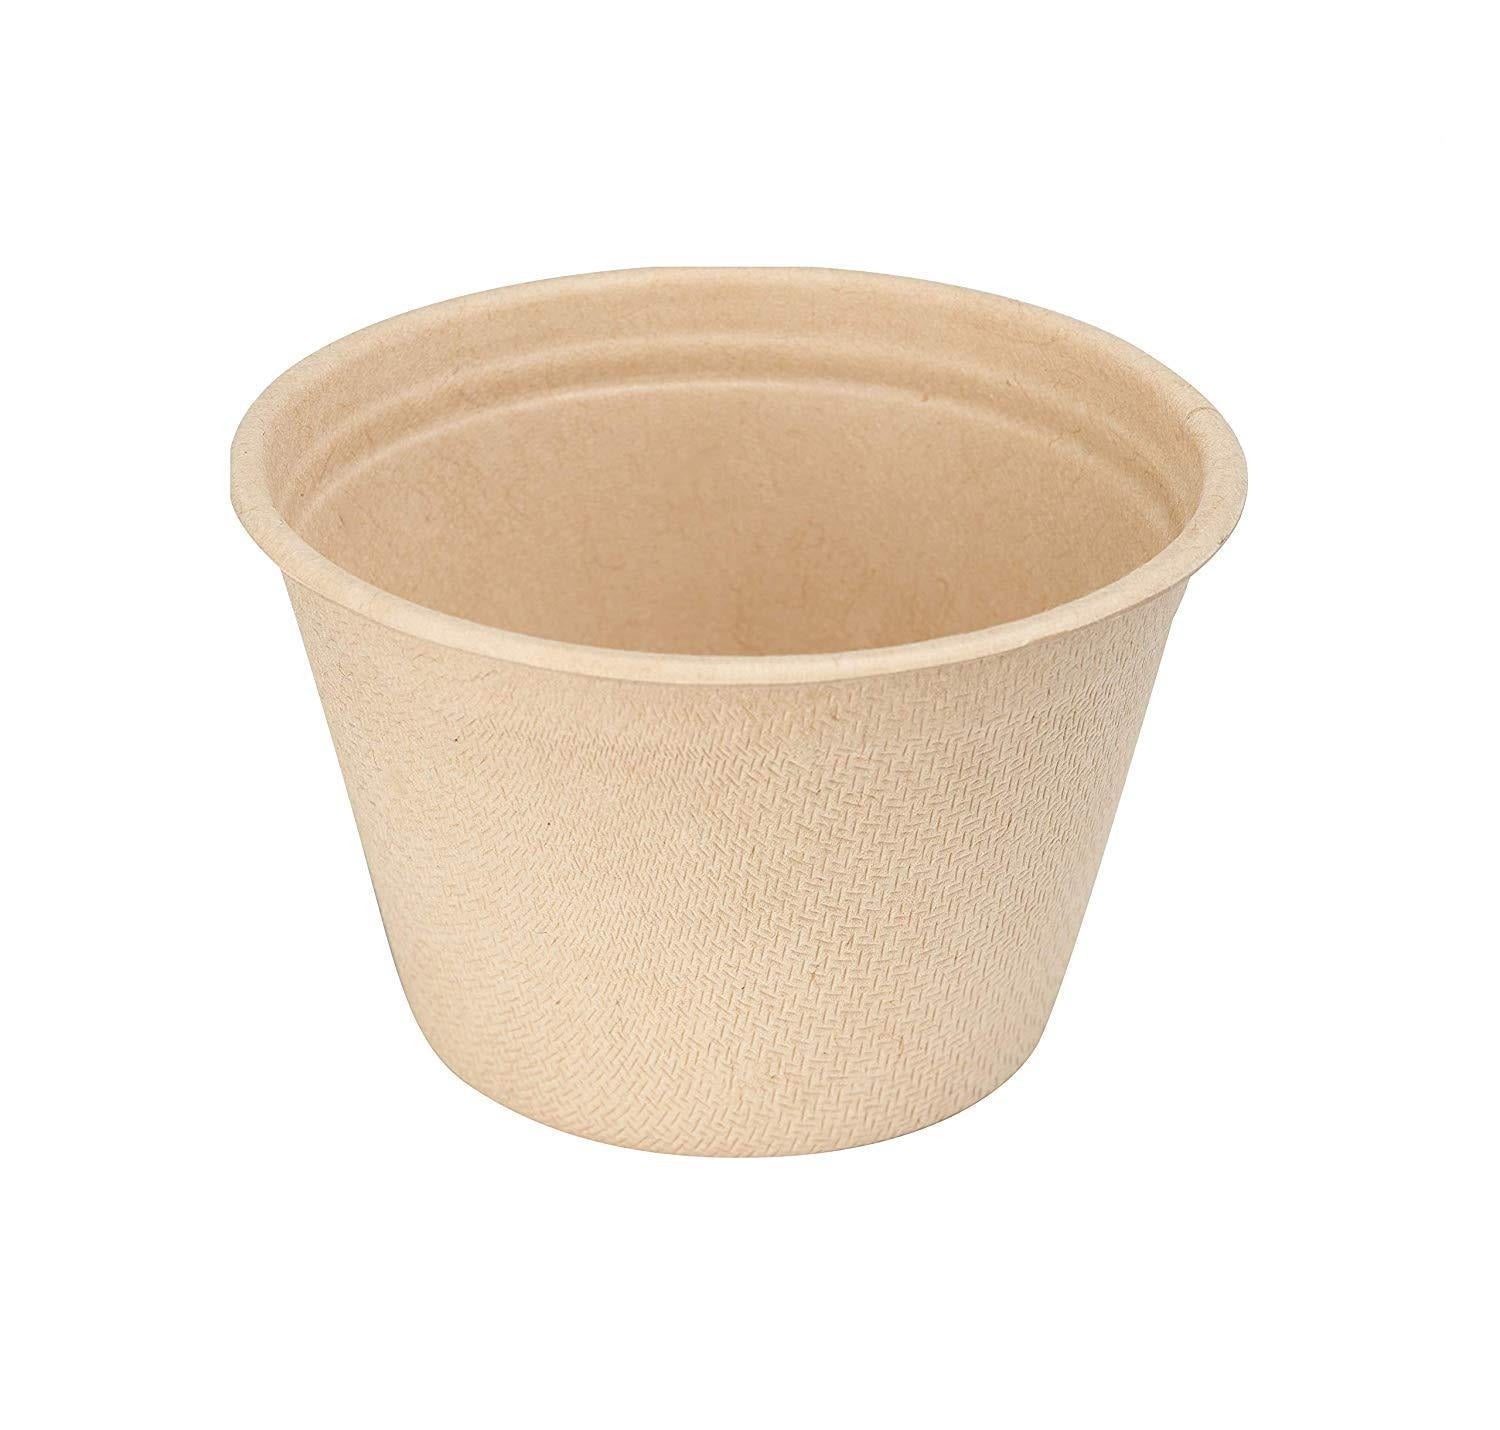 tasting cups souffle cups shot cup jelloshot tasting cup taste cup portion cup deliverysolutions food packaging disposablecups ketchup mustard cup artsandcraft small cup travel size cup mouthwash cup  2 oz 2 ounce cup